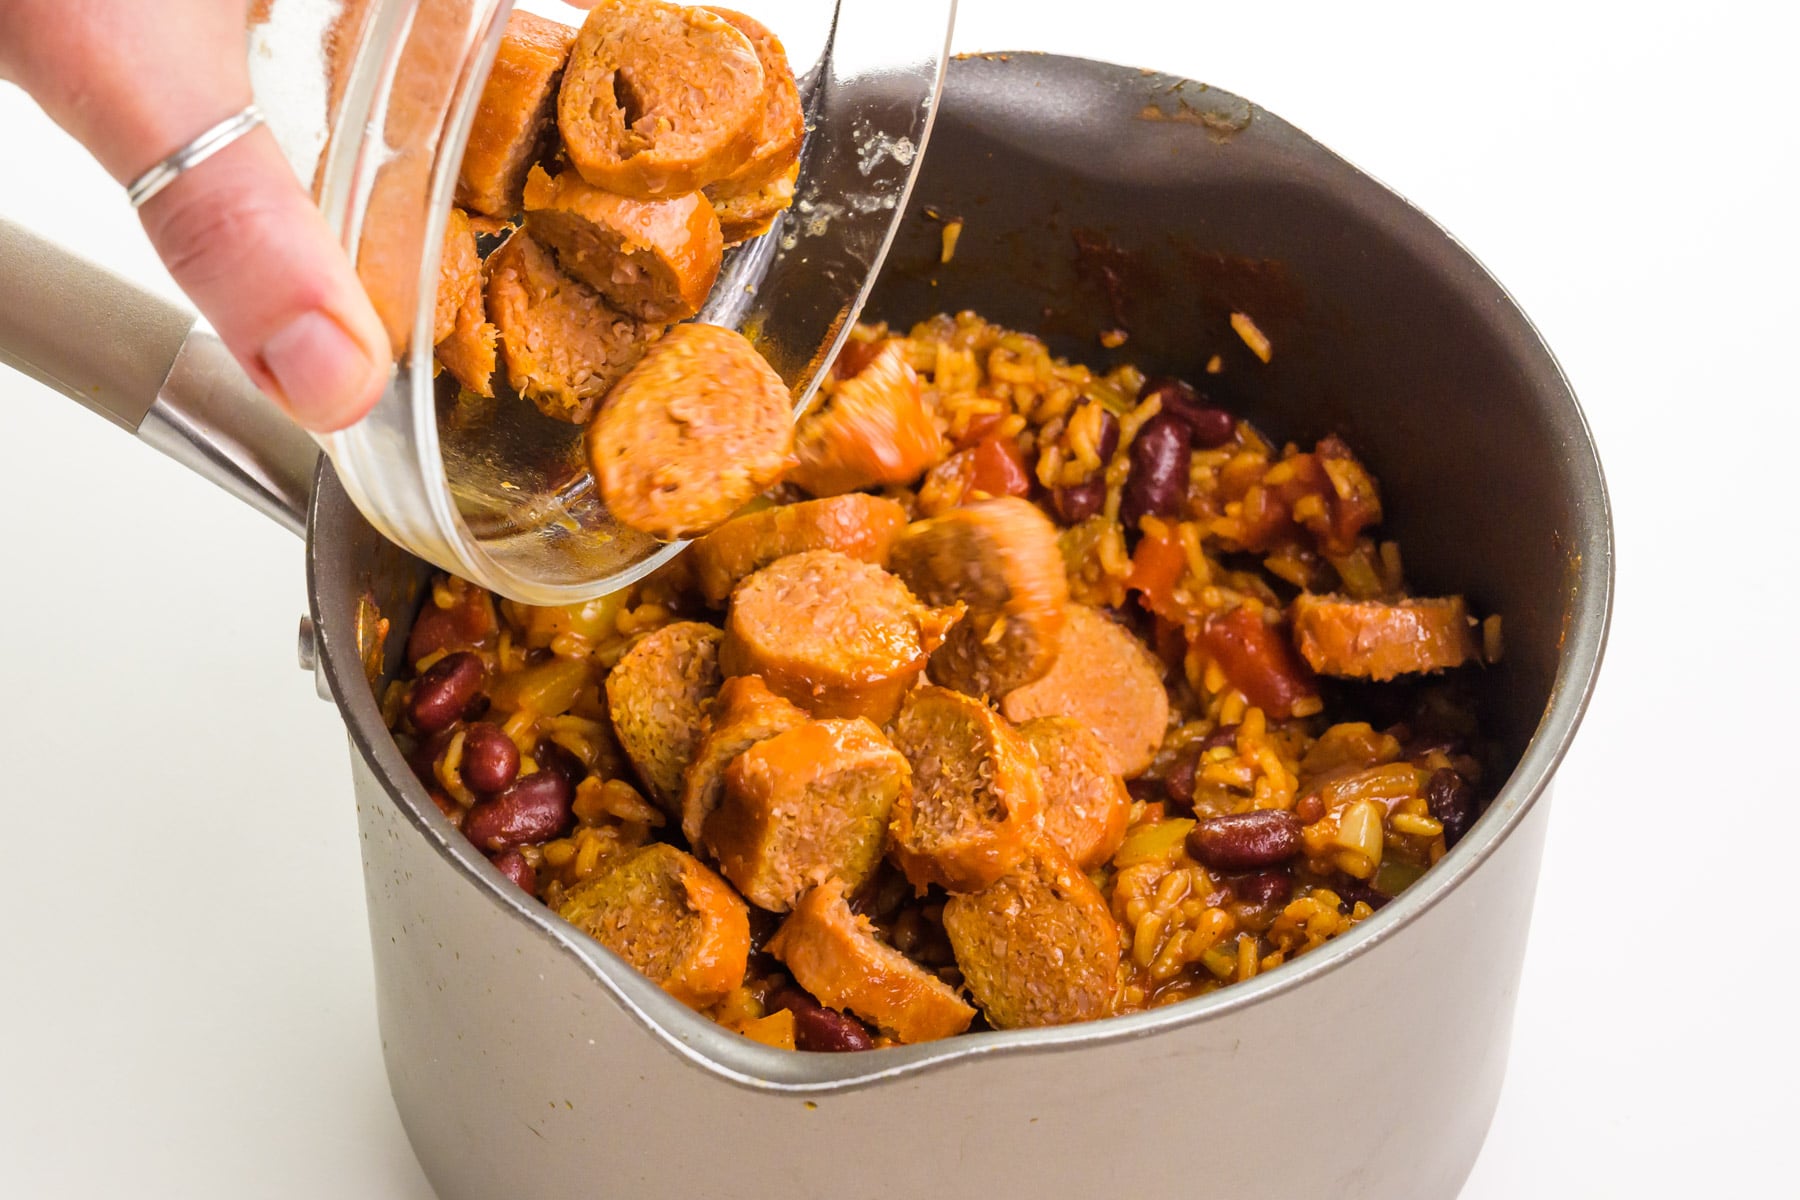 Sliced vegan sausage is being poured into a saucepan with tomato-based ingredients.